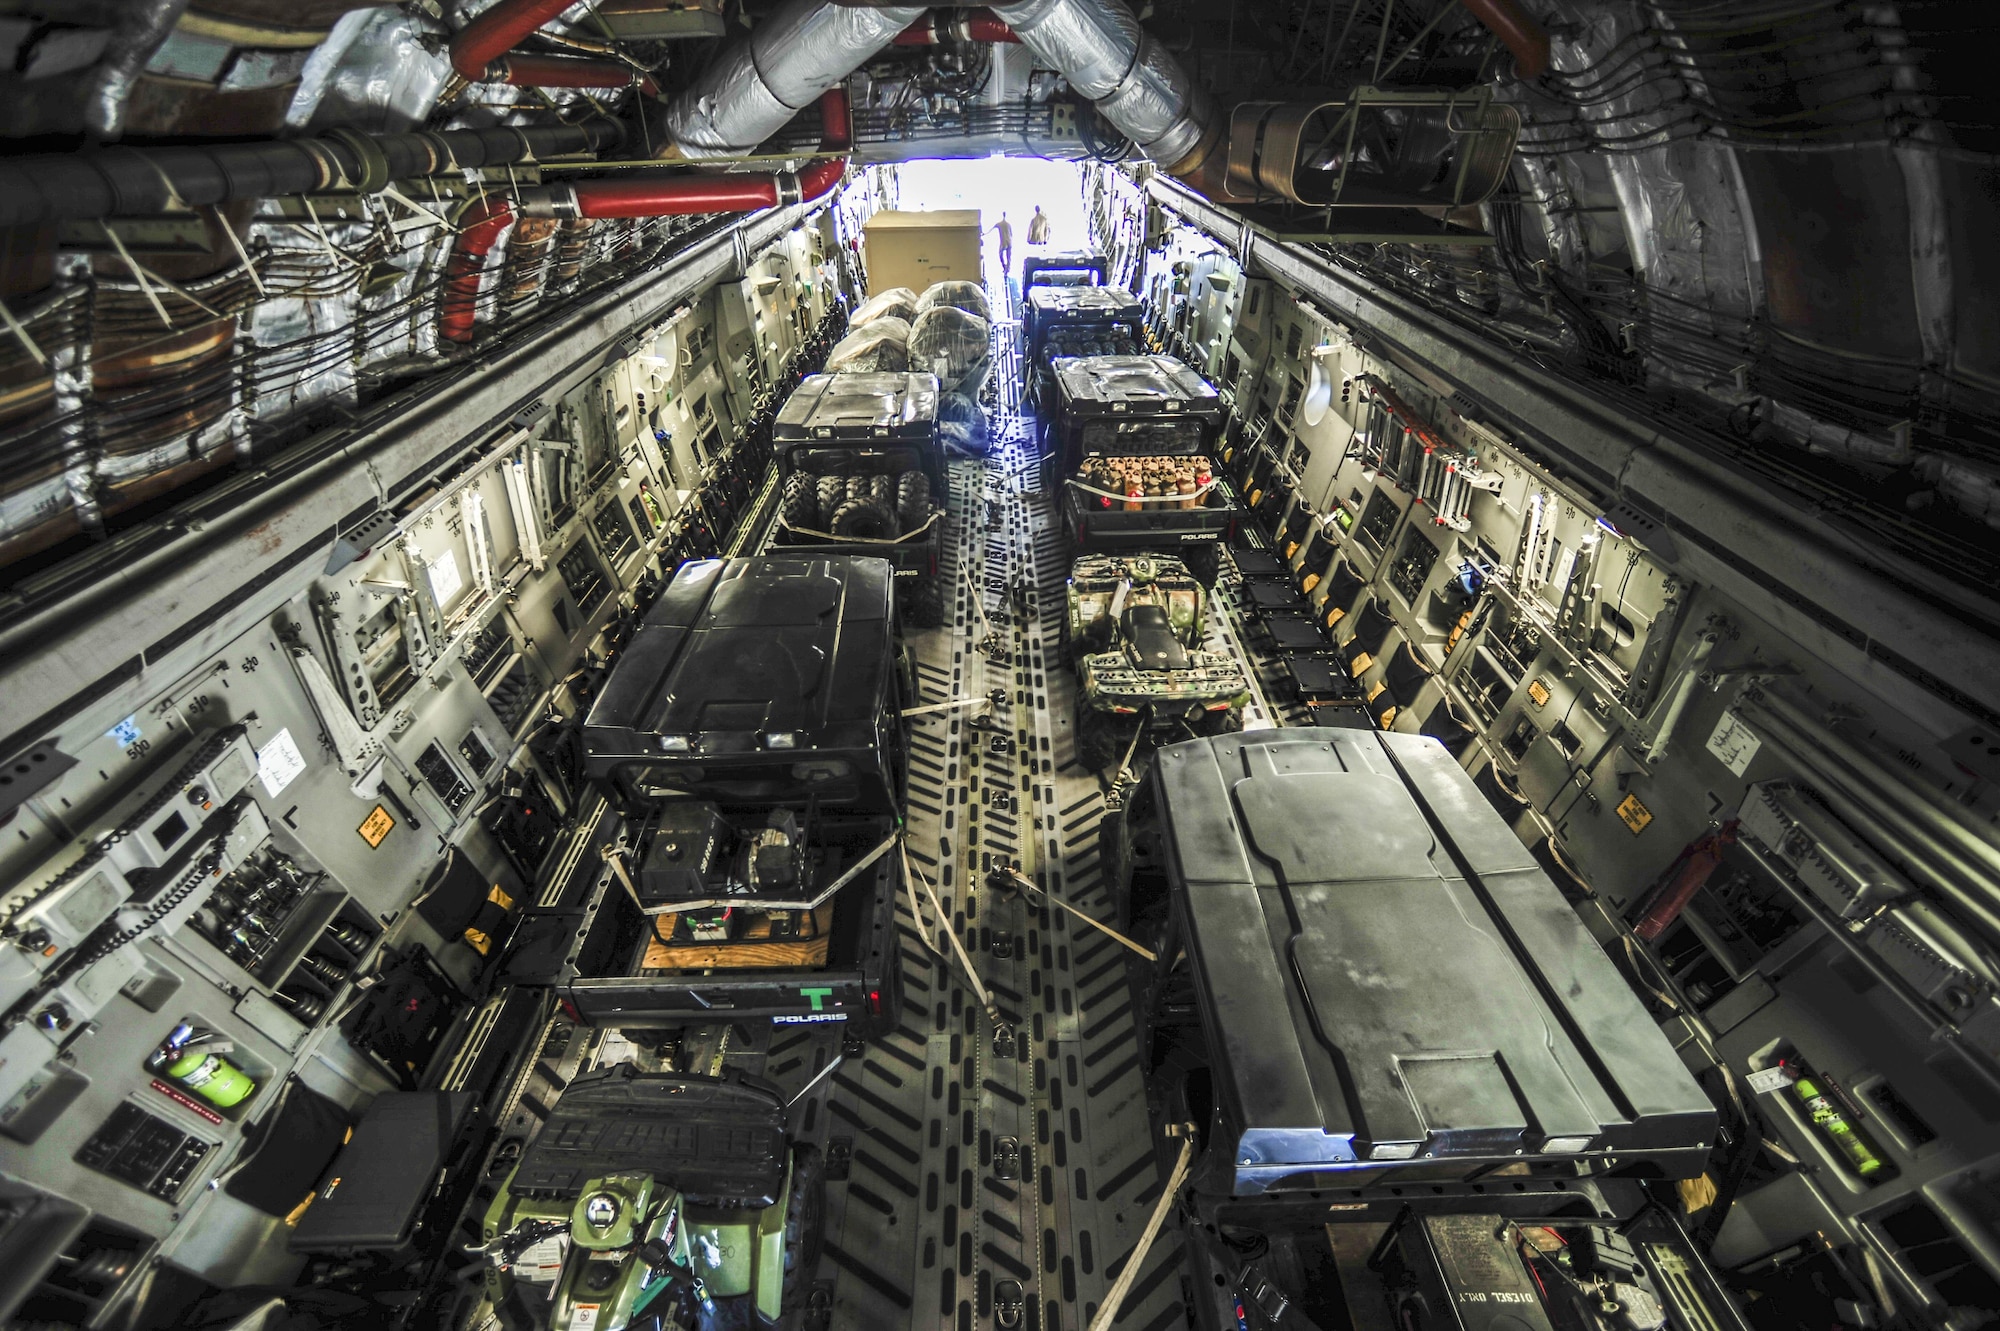 Equipment in support of U.S. Air Forces Central Command personnel recovery mission arrive on a C-17 Globemaster III assigned to Charleston Air Force Base, S.C., Sept. 28, 2015, at Diyarbakir Air Base, Turkey. The deployment of assets and personnel will enable the USAFCENT with recovery of Coalition partners should they need assistance in Syria or Iraq. (U.S. Air Force photo by Airman 1st Class Cory W. Bush/Released)
